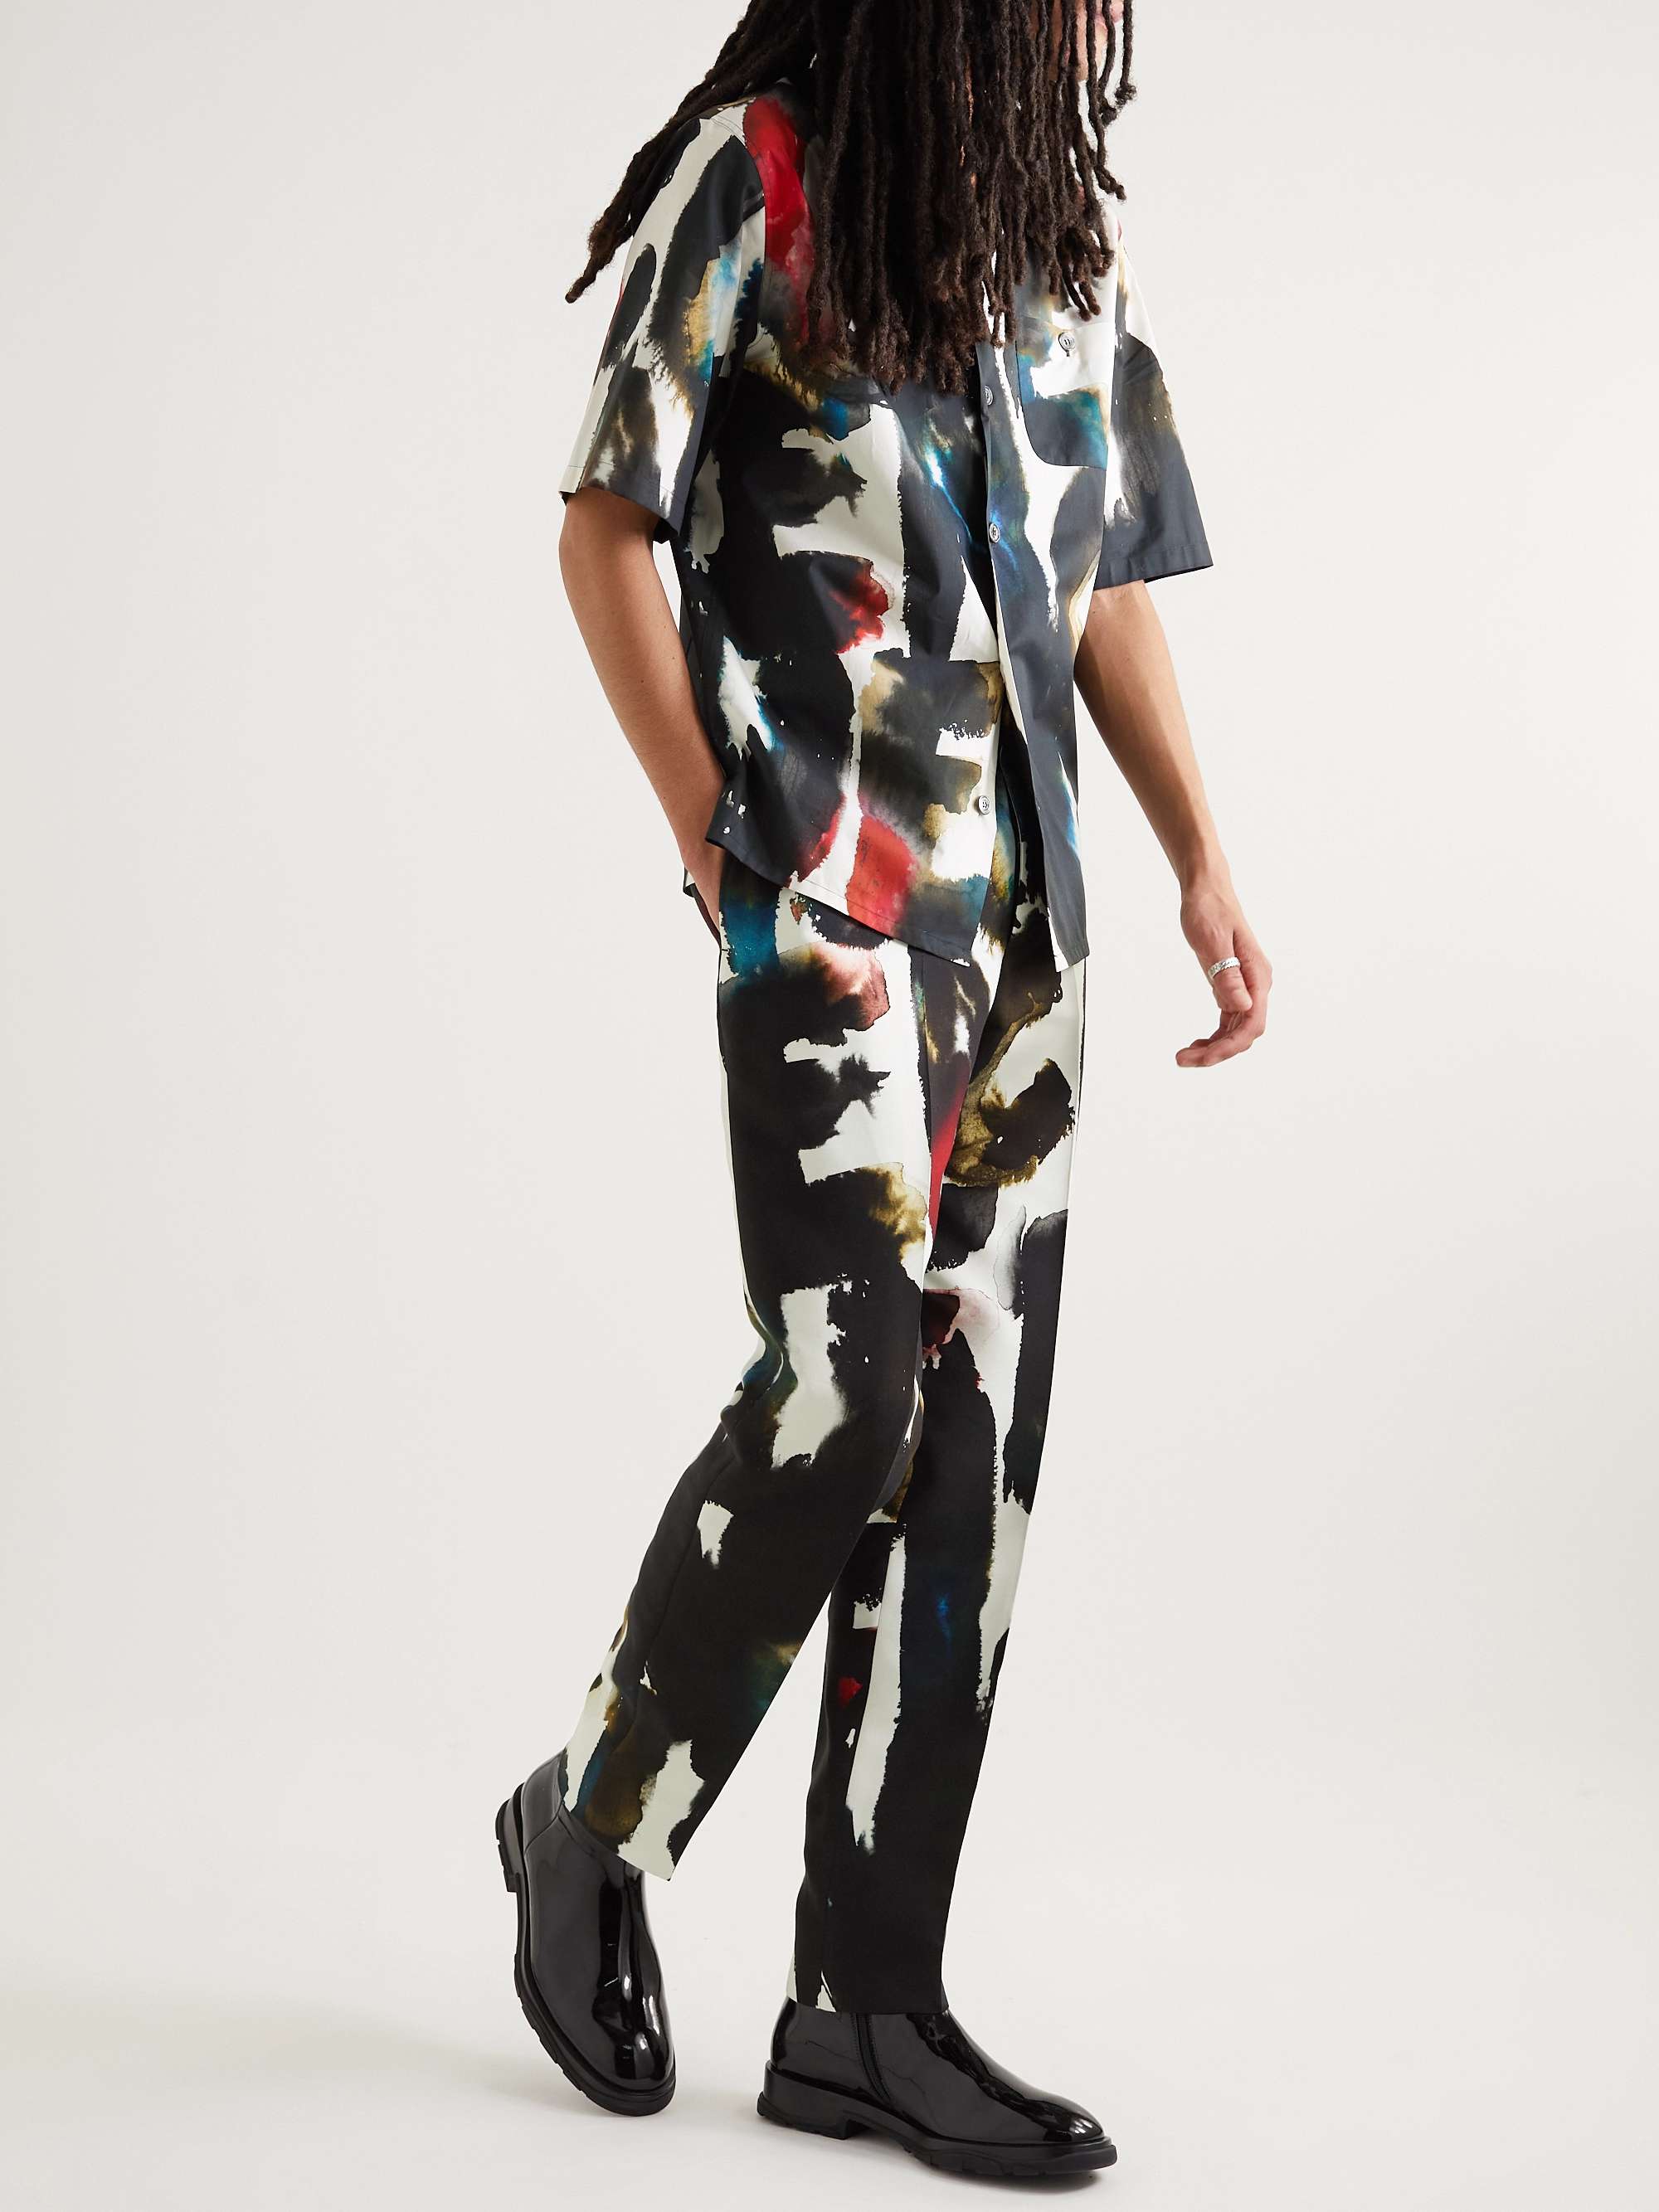 ALEXANDER MCQUEEN Slim-Leg Abstract Printed Cady Trousers